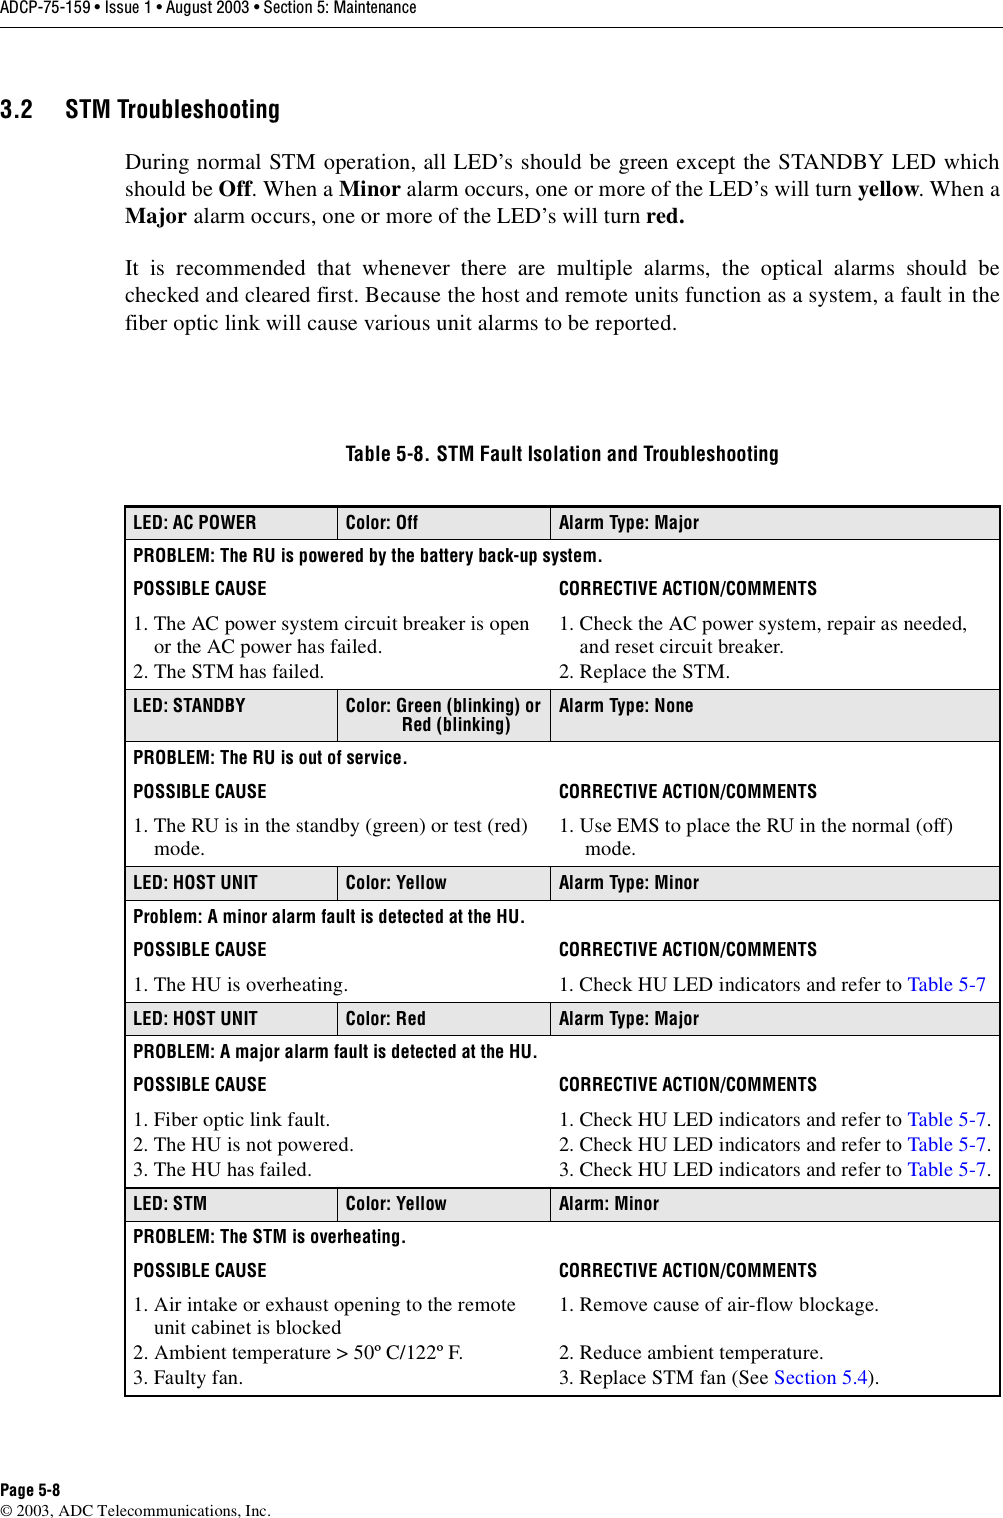 ADCP-75-159 • Issue 1 • August 2003 • Section 5: MaintenancePage 5-8© 2003, ADC Telecommunications, Inc.3.2 STM TroubleshootingDuring normal STM operation, all LED’s should be green except the STANDBY LED whichshould be Off. When a Minor alarm occurs, one or more of the LED’s will turn yellow. When aMajor alarm occurs, one or more of the LED’s will turn red. It is recommended that whenever there are multiple alarms, the optical alarms should bechecked and cleared first. Because the host and remote units function as a system, a fault in thefiber optic link will cause various unit alarms to be reported. Table 5-8. STM Fault Isolation and TroubleshootingLED: AC POWER Color: Off Alarm Type: MajorPROBLEM: The RU is powered by the battery back-up system.POSSIBLE CAUSE CORRECTIVE ACTION/COMMENTS1. The AC power system circuit breaker is open    or the AC power has failed. 2. The STM has failed. 1. Check the AC power system, repair as needed,     and reset circuit breaker. 2. Replace the STM. LED: STANDBY Color: Green (blinking) or            Red (blinking)Alarm Type: NonePROBLEM: The RU is out of service.POSSIBLE CAUSE CORRECTIVE ACTION/COMMENTS1. The RU is in the standby (green) or test (red)    mode.  1. Use EMS to place the RU in the normal (off)     mode.LED: HOST UNIT Color: Yellow Alarm Type: MinorProblem: A minor alarm fault is detected at the HU. POSSIBLE CAUSE CORRECTIVE ACTION/COMMENTS1. The HU is overheating.  1. Check HU LED indicators and refer to Table 5-7 LED: HOST UNIT Color: Red Alarm Type: MajorPROBLEM: A major alarm fault is detected at the HU. POSSIBLE CAUSE CORRECTIVE ACTION/COMMENTS1. Fiber optic link fault. 2. The HU is not powered. 3. The HU has failed. 1. Check HU LED indicators and refer to Table 5-7.2. Check HU LED indicators and refer to Table 5-7.3. Check HU LED indicators and refer to Table 5-7.LED: STM Color: Yellow Alarm: MinorPROBLEM: The STM is overheating.POSSIBLE CAUSE CORRECTIVE ACTION/COMMENTS1. Air intake or exhaust opening to the remote    unit cabinet is blocked2. Ambient temperature &gt; 50º C/122º F. 3. Faulty fan. 1. Remove cause of air-flow blockage. 2. Reduce ambient temperature.3. Replace STM fan (See Section 5.4).